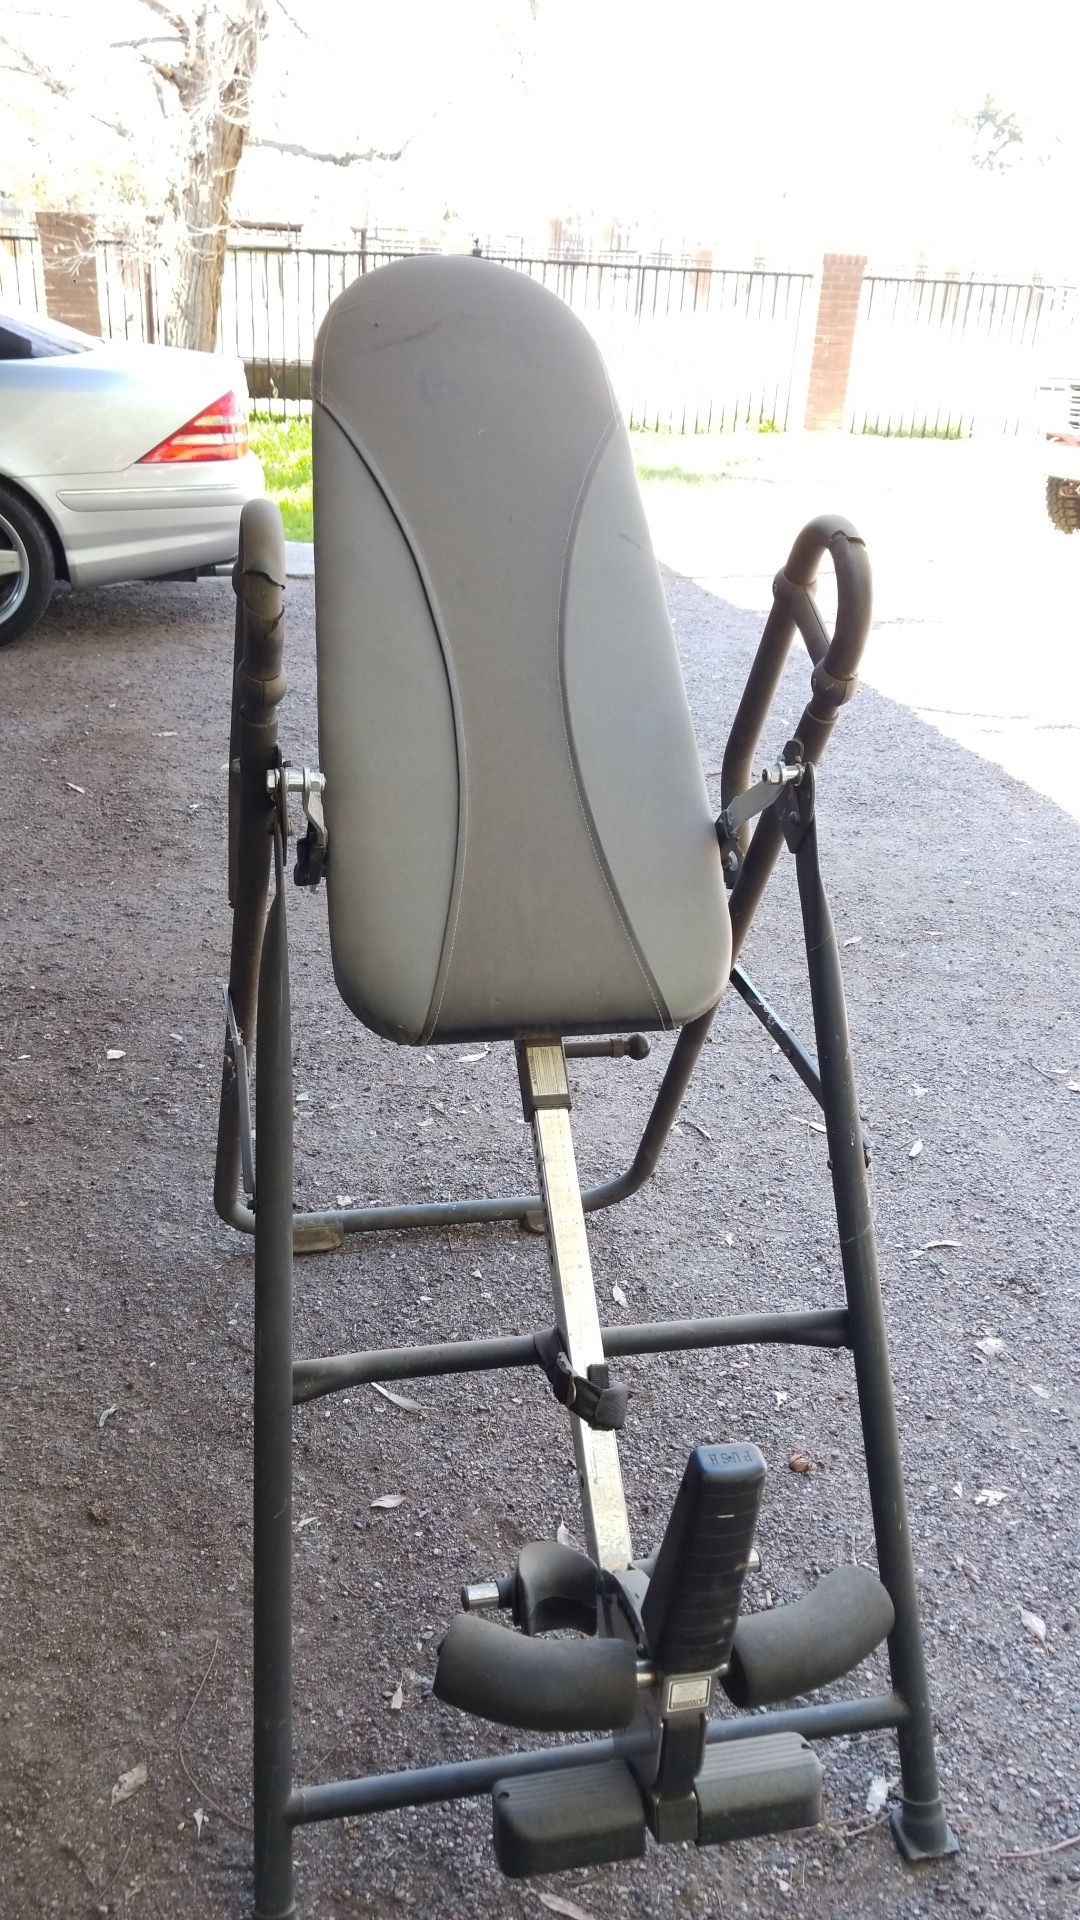 Free inverter and massage table 11th Avenue and Dunlap